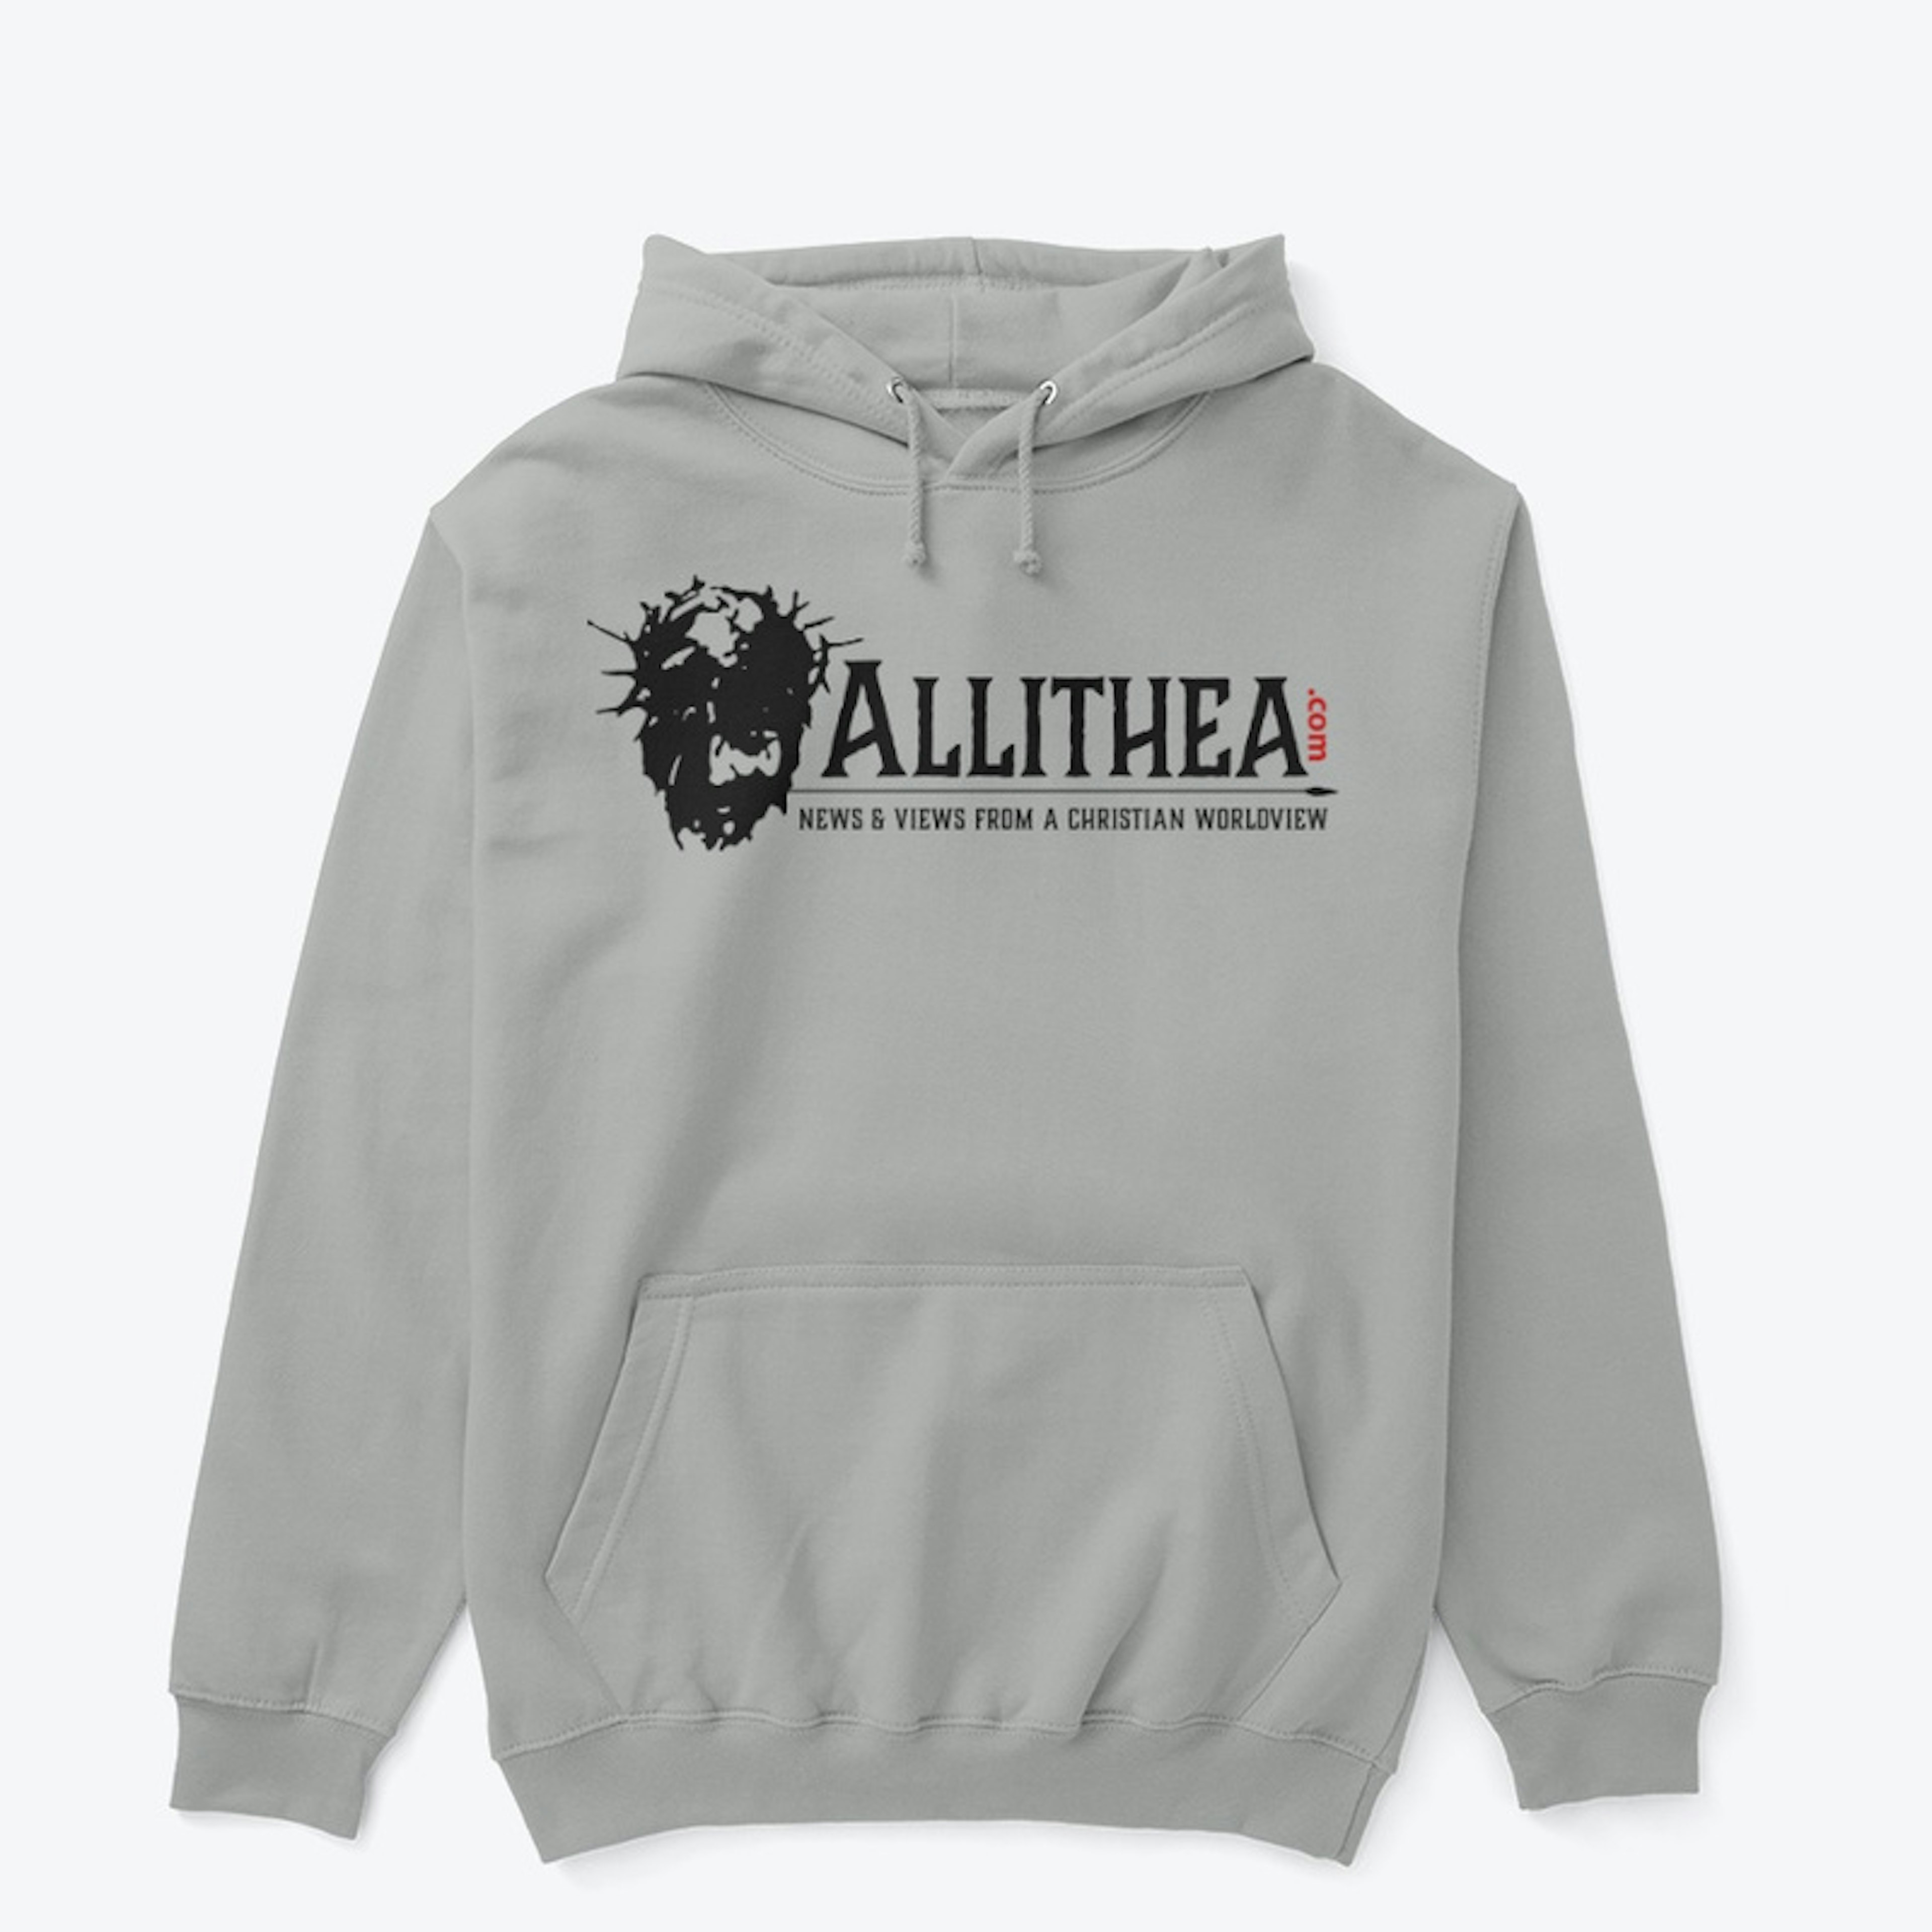 Allithea - Ancient Greek for "Truth"